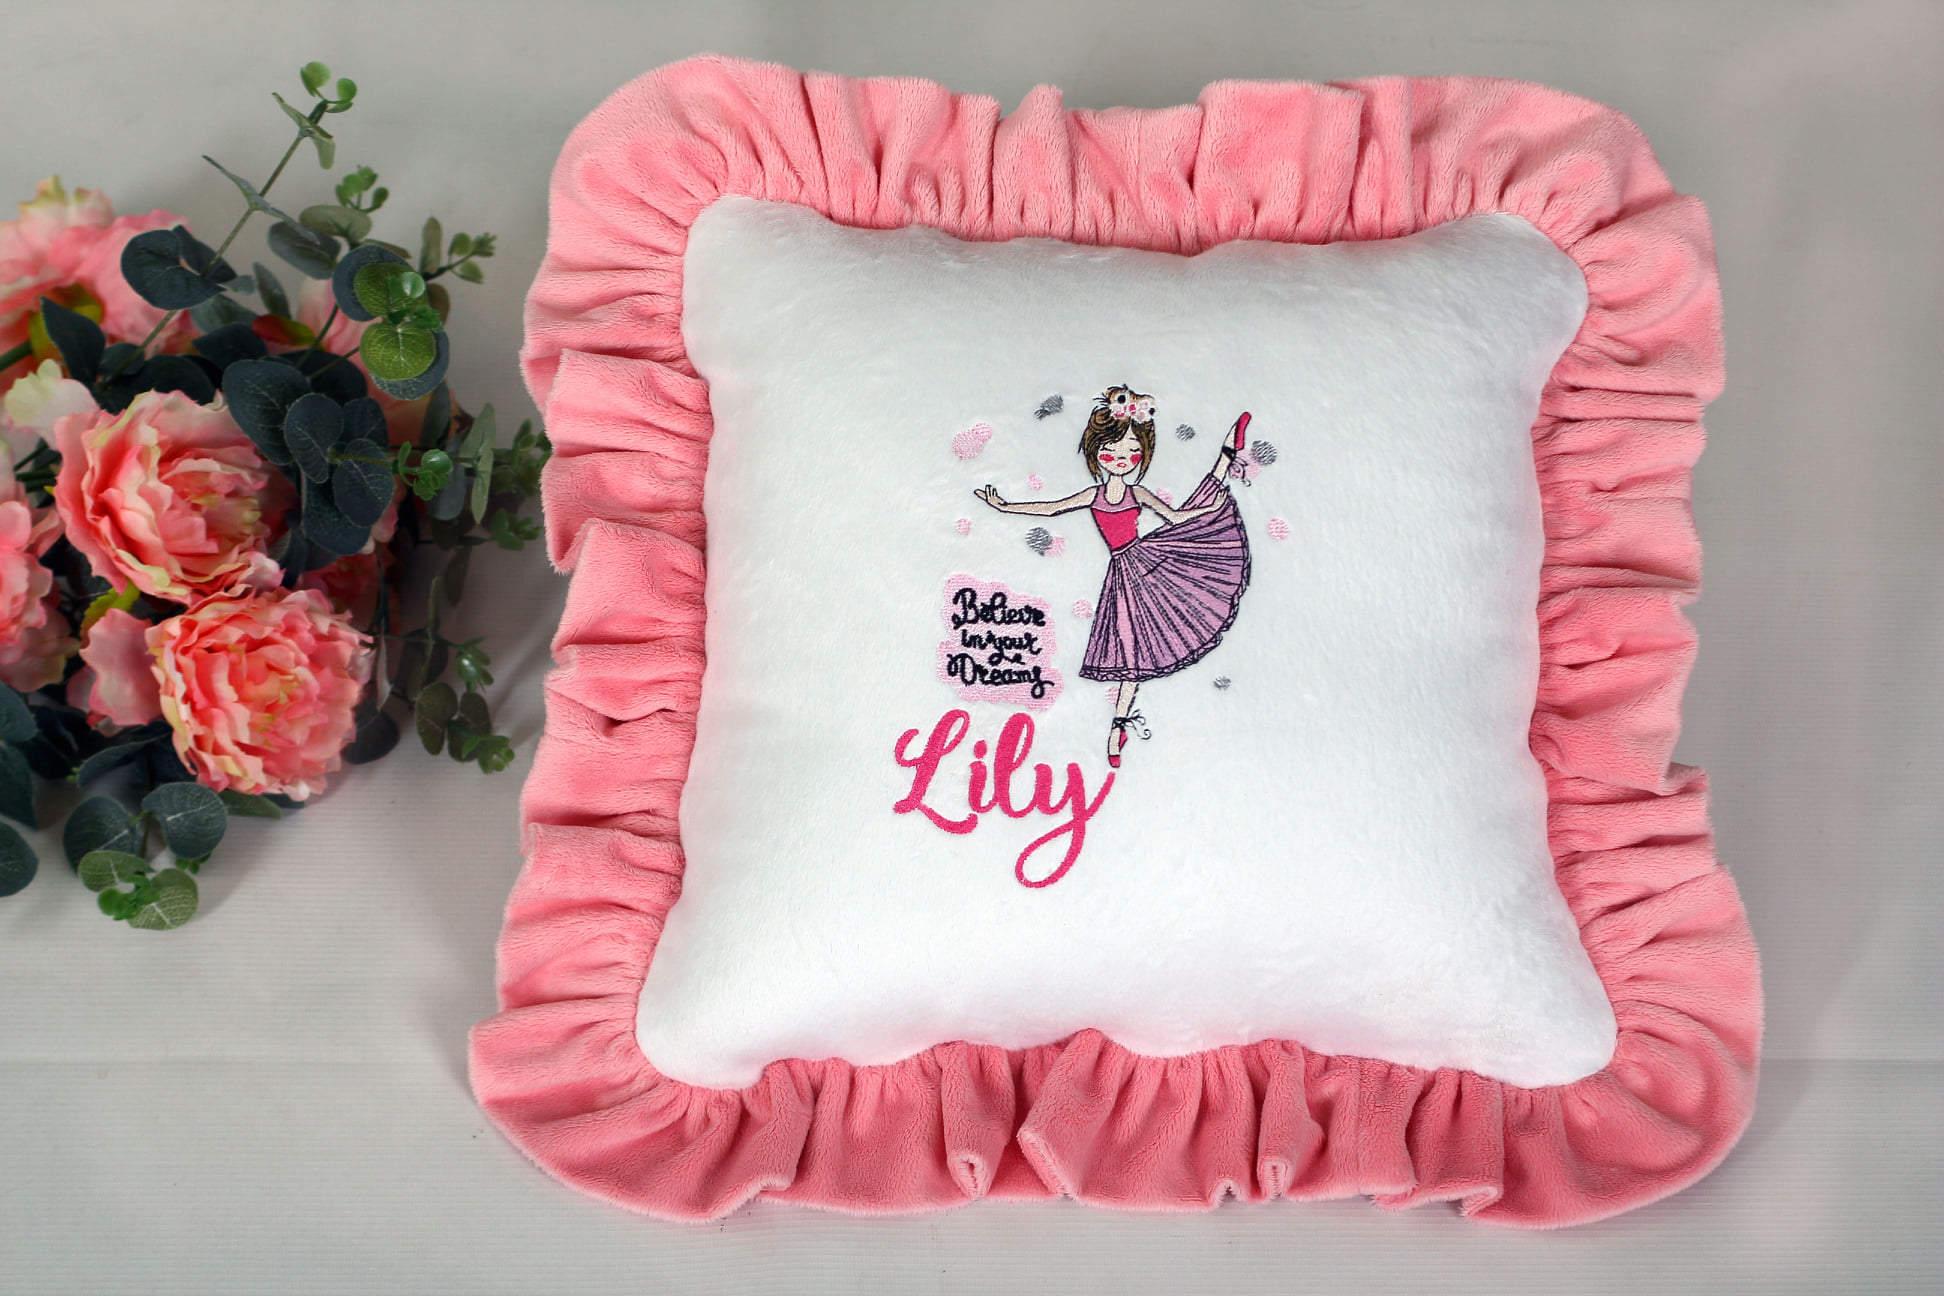 Cushion with ballet dancer embroidery design